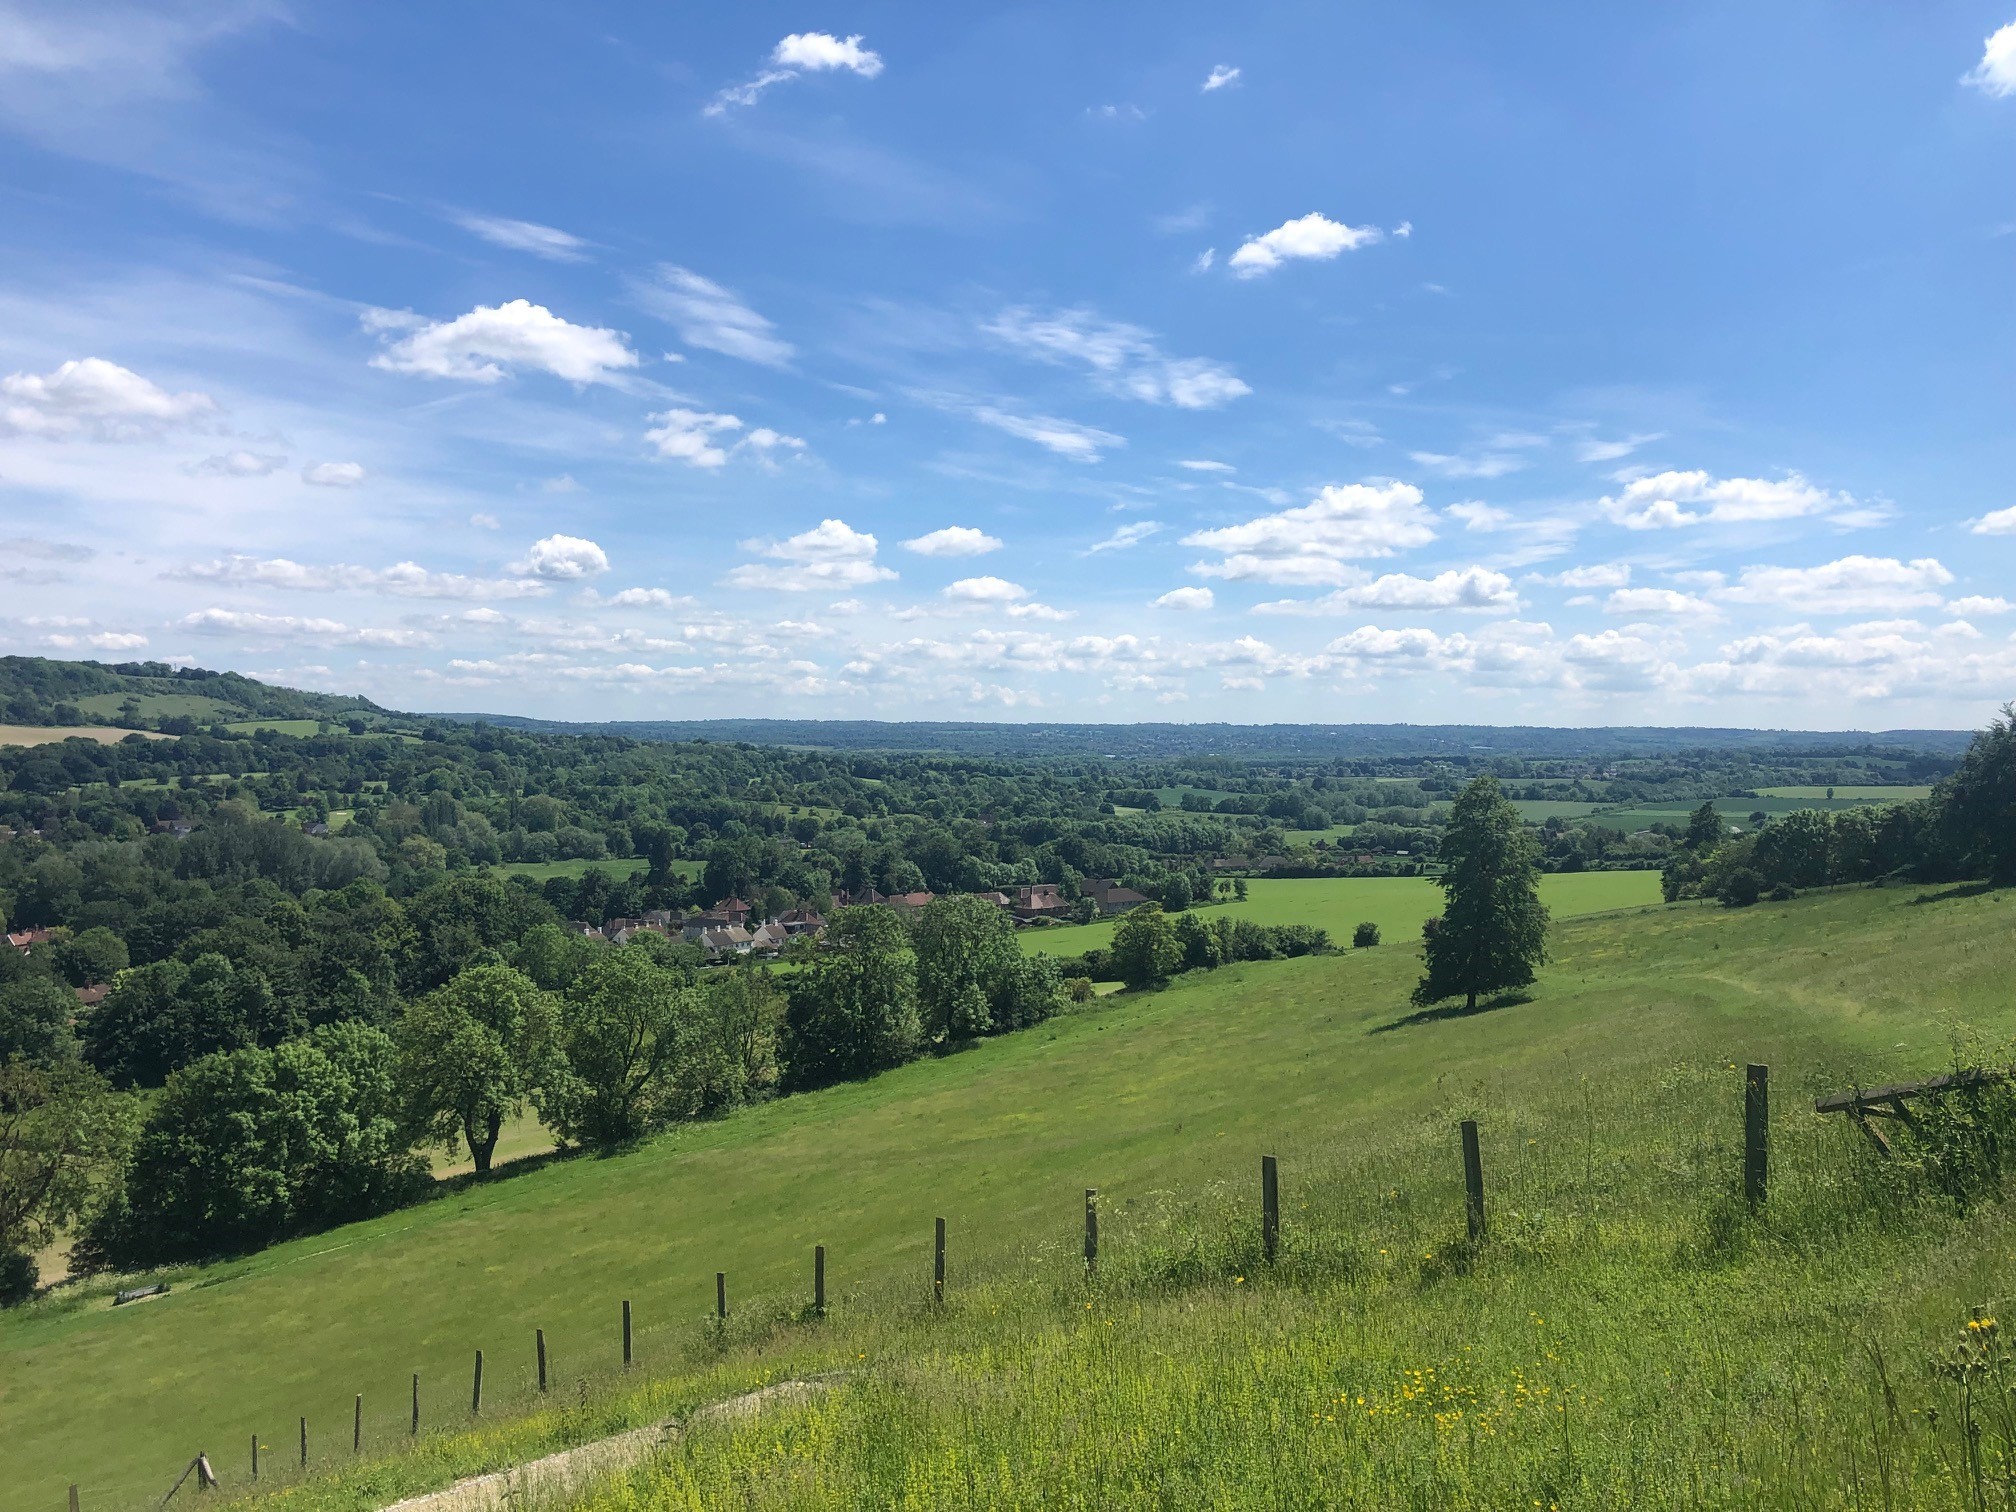 Panoramic view with green field and trees below and blue sky above